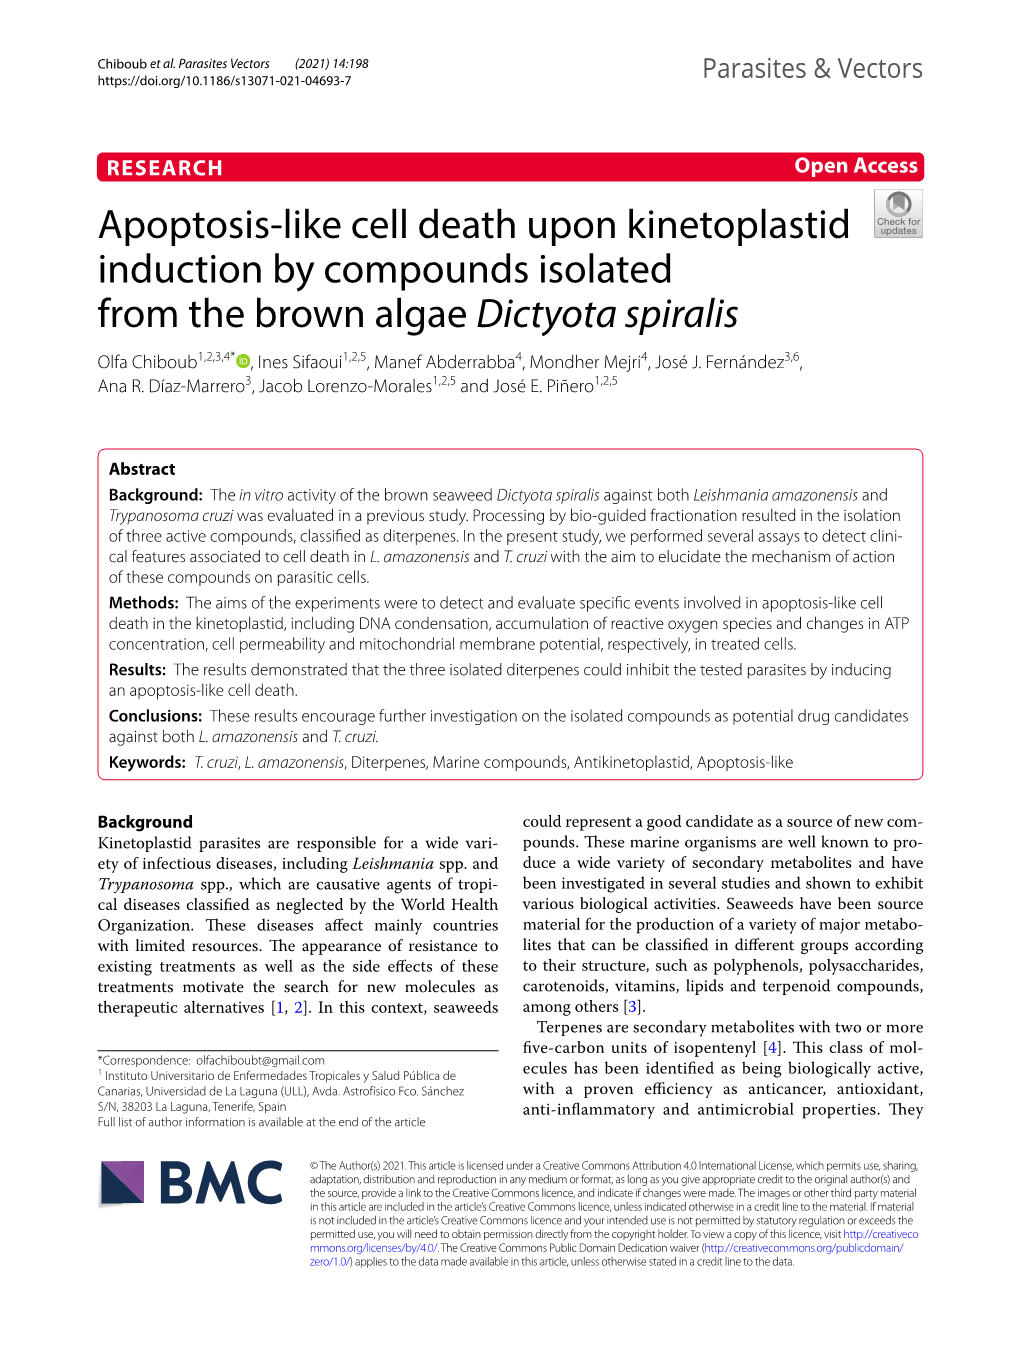 Apoptosis-Like Cell Death Upon Kinetoplastid Induction By